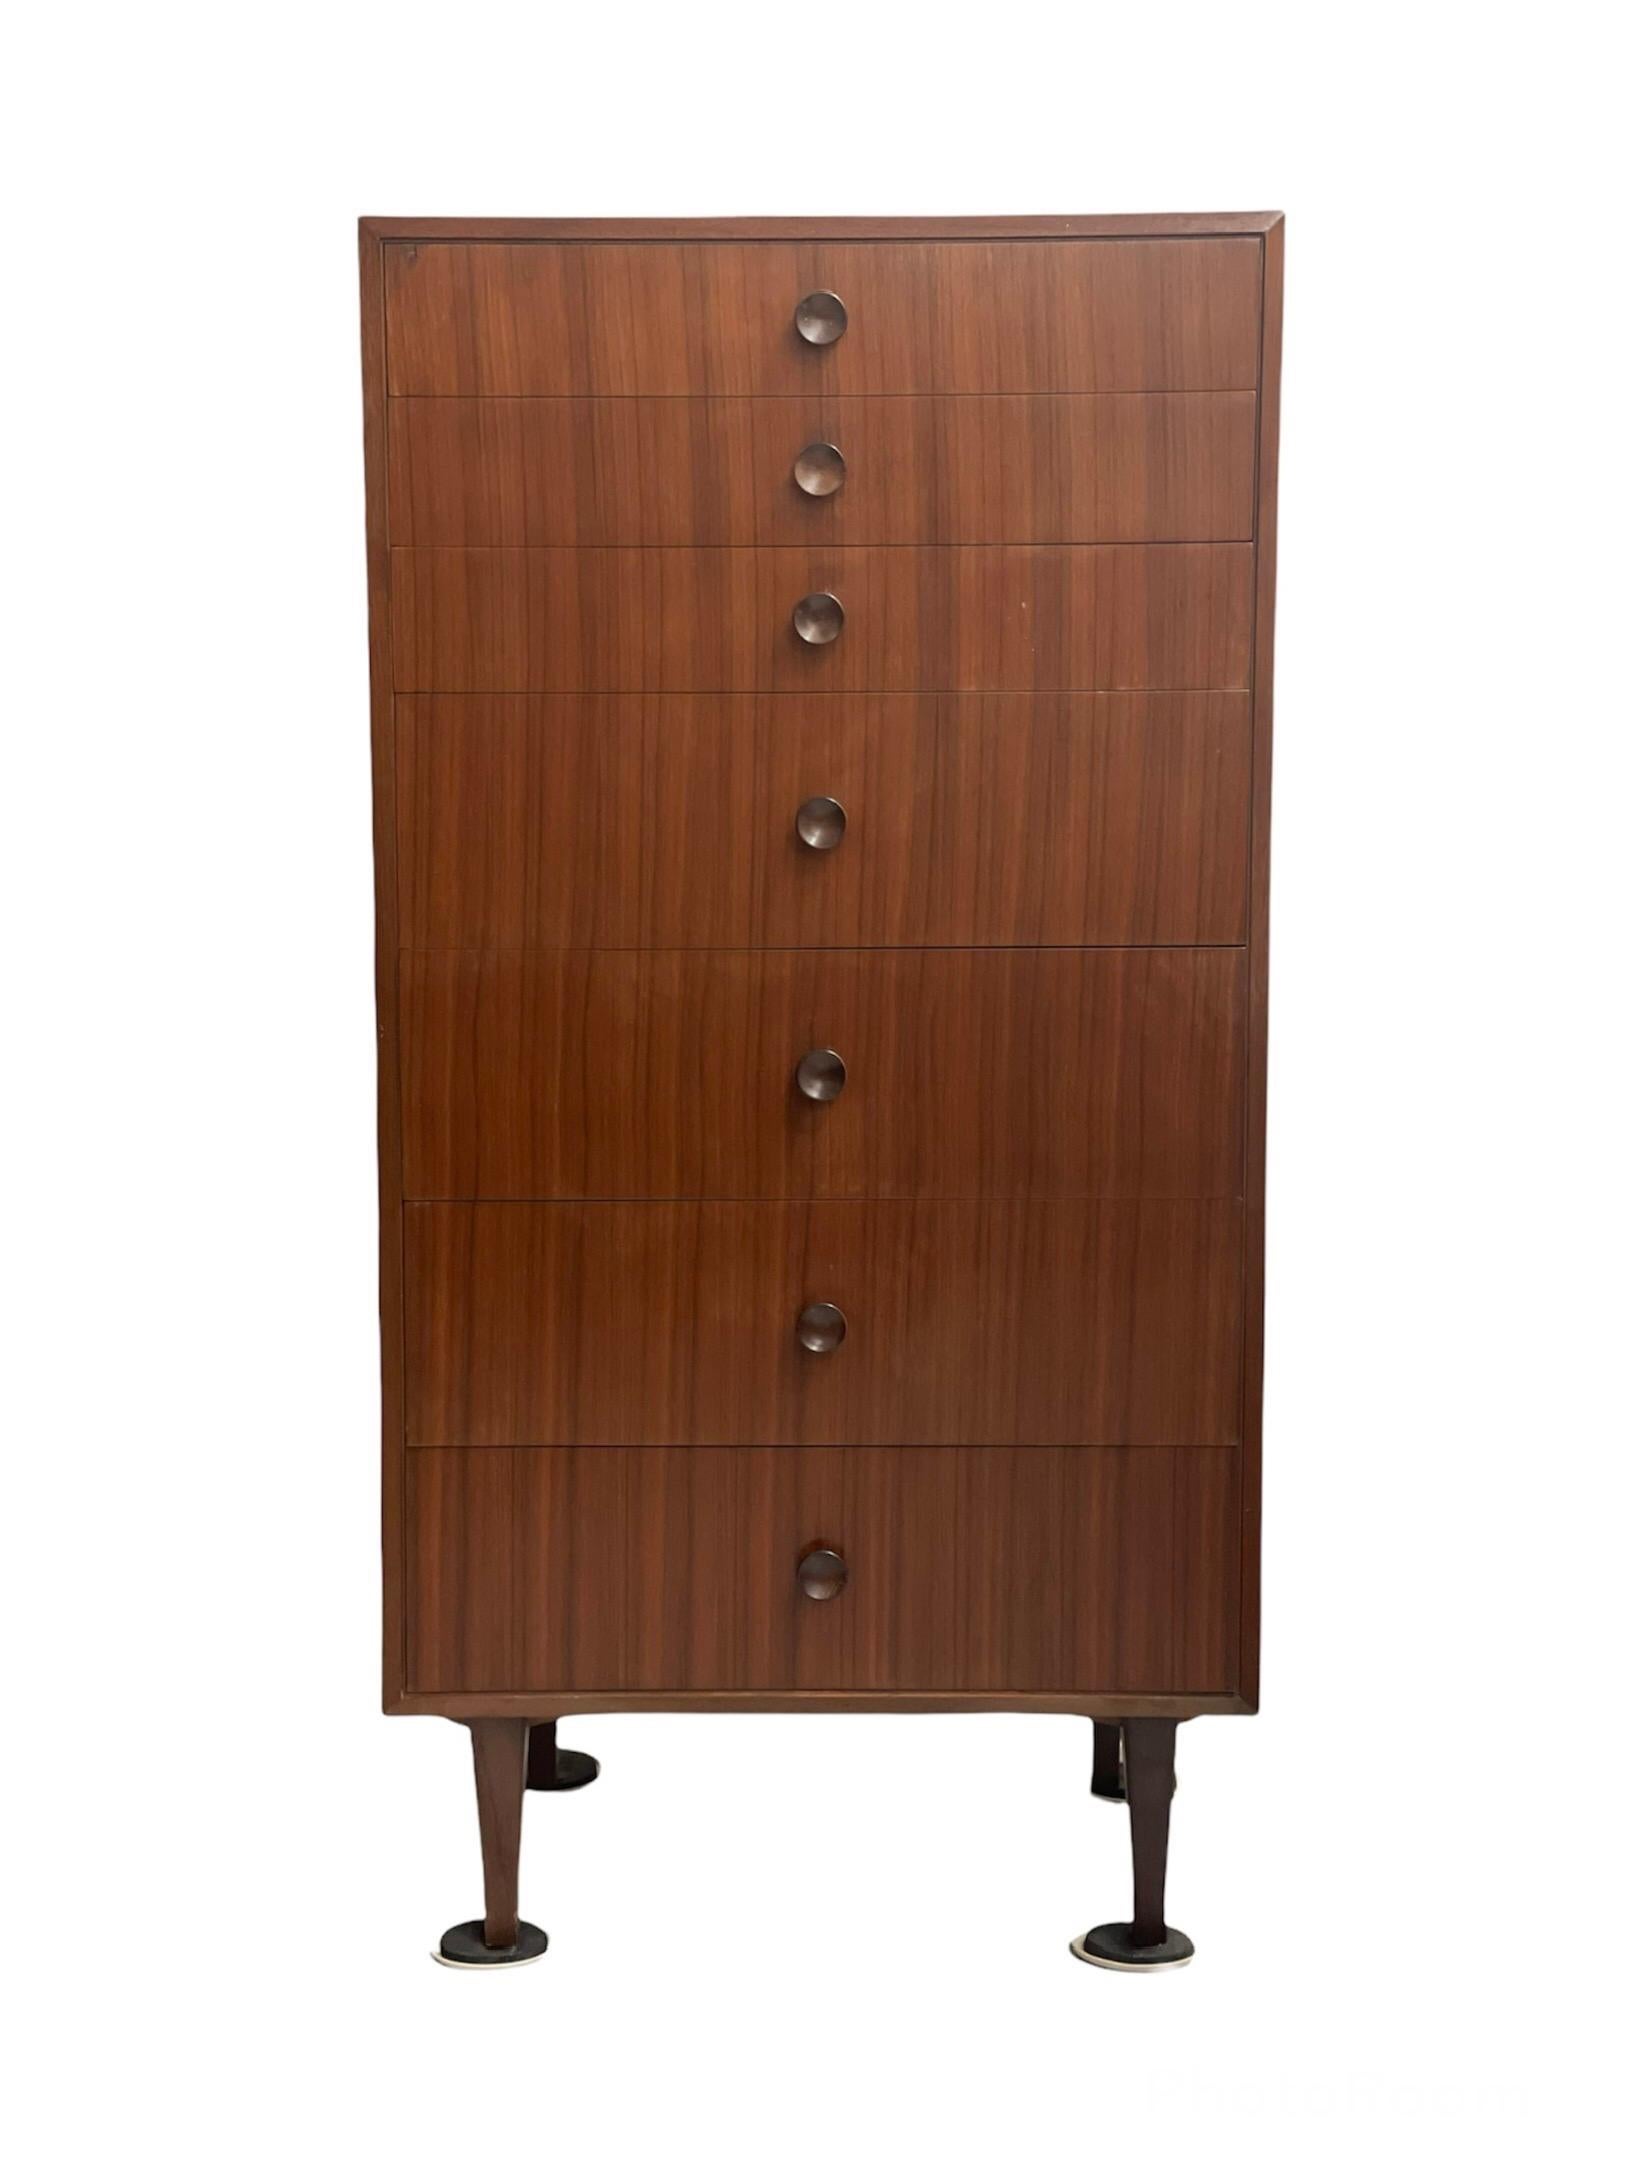 Mid 20th Century Walnut Seven Drawer Tallboy Dresser Lingerie Chest In Good Condition For Sale In Seattle, WA